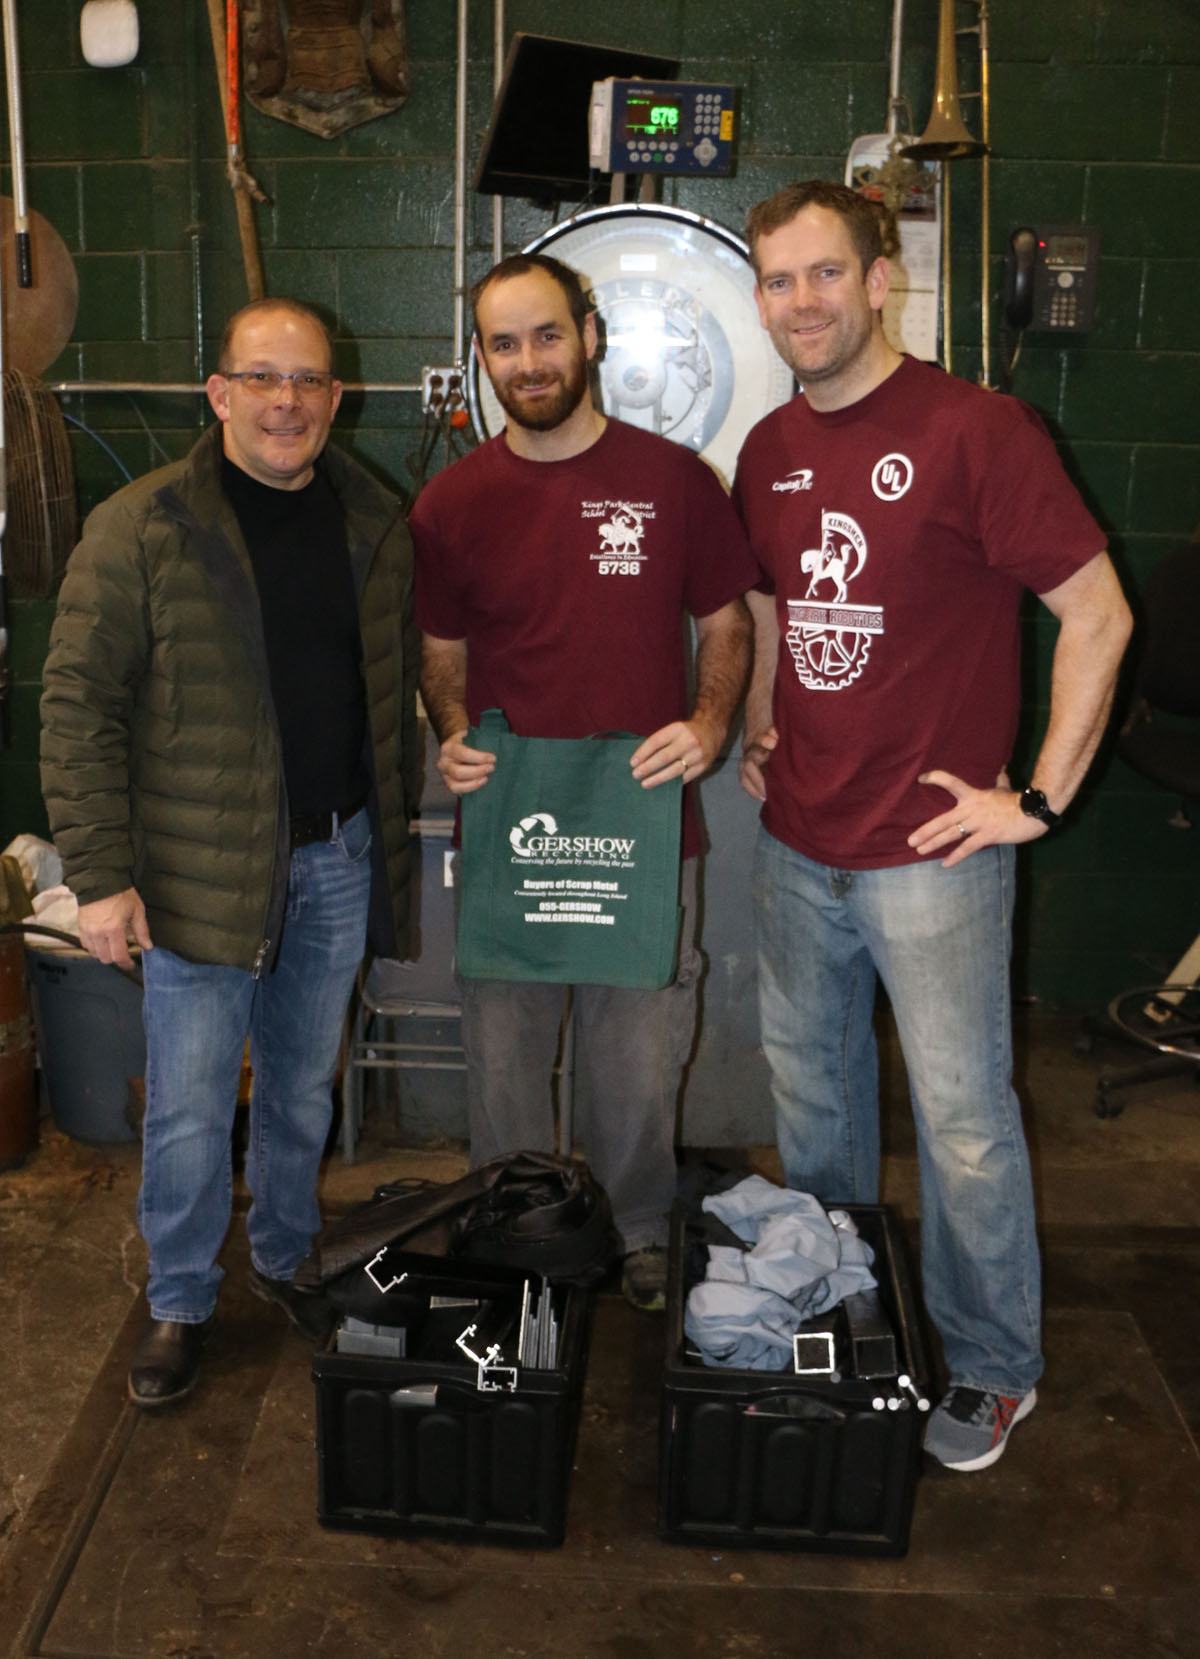 Pictured (left to right): Gershow Manager Jonathan Abrams, Kings Park High School Robotics Team Coach Kevin Hutchins and Assistant Coach Sam Kruse.